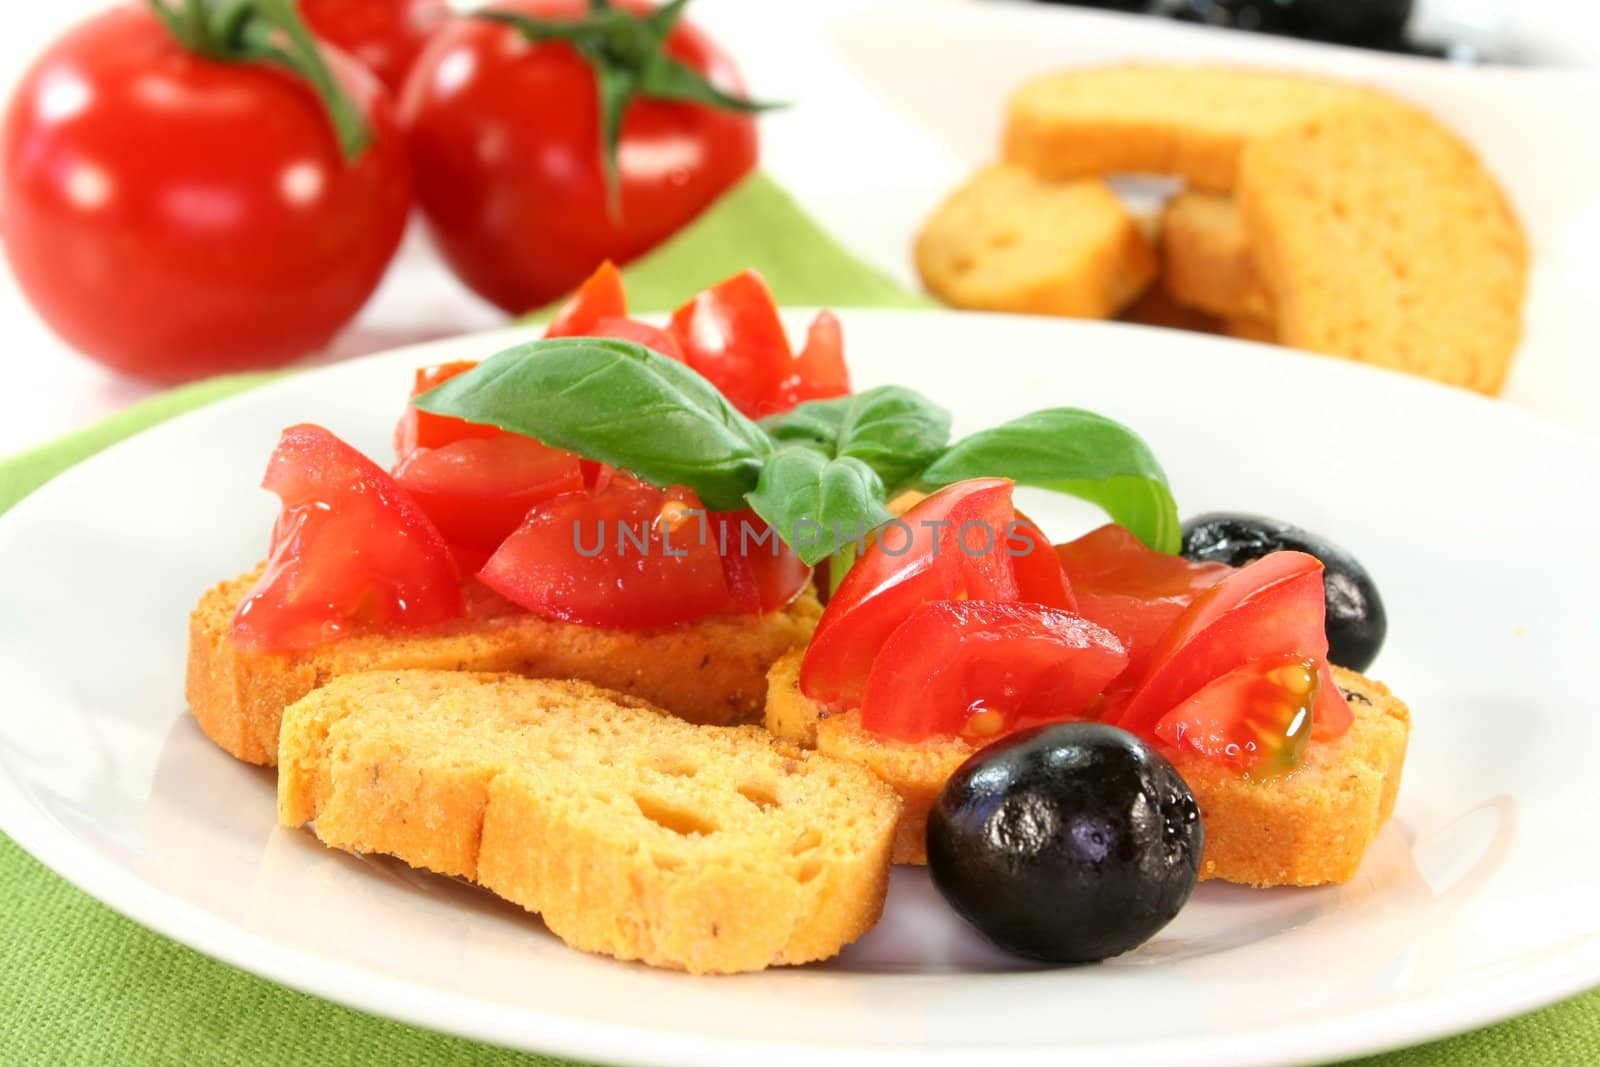 Bruschetta with tomatoes, olives and basil
